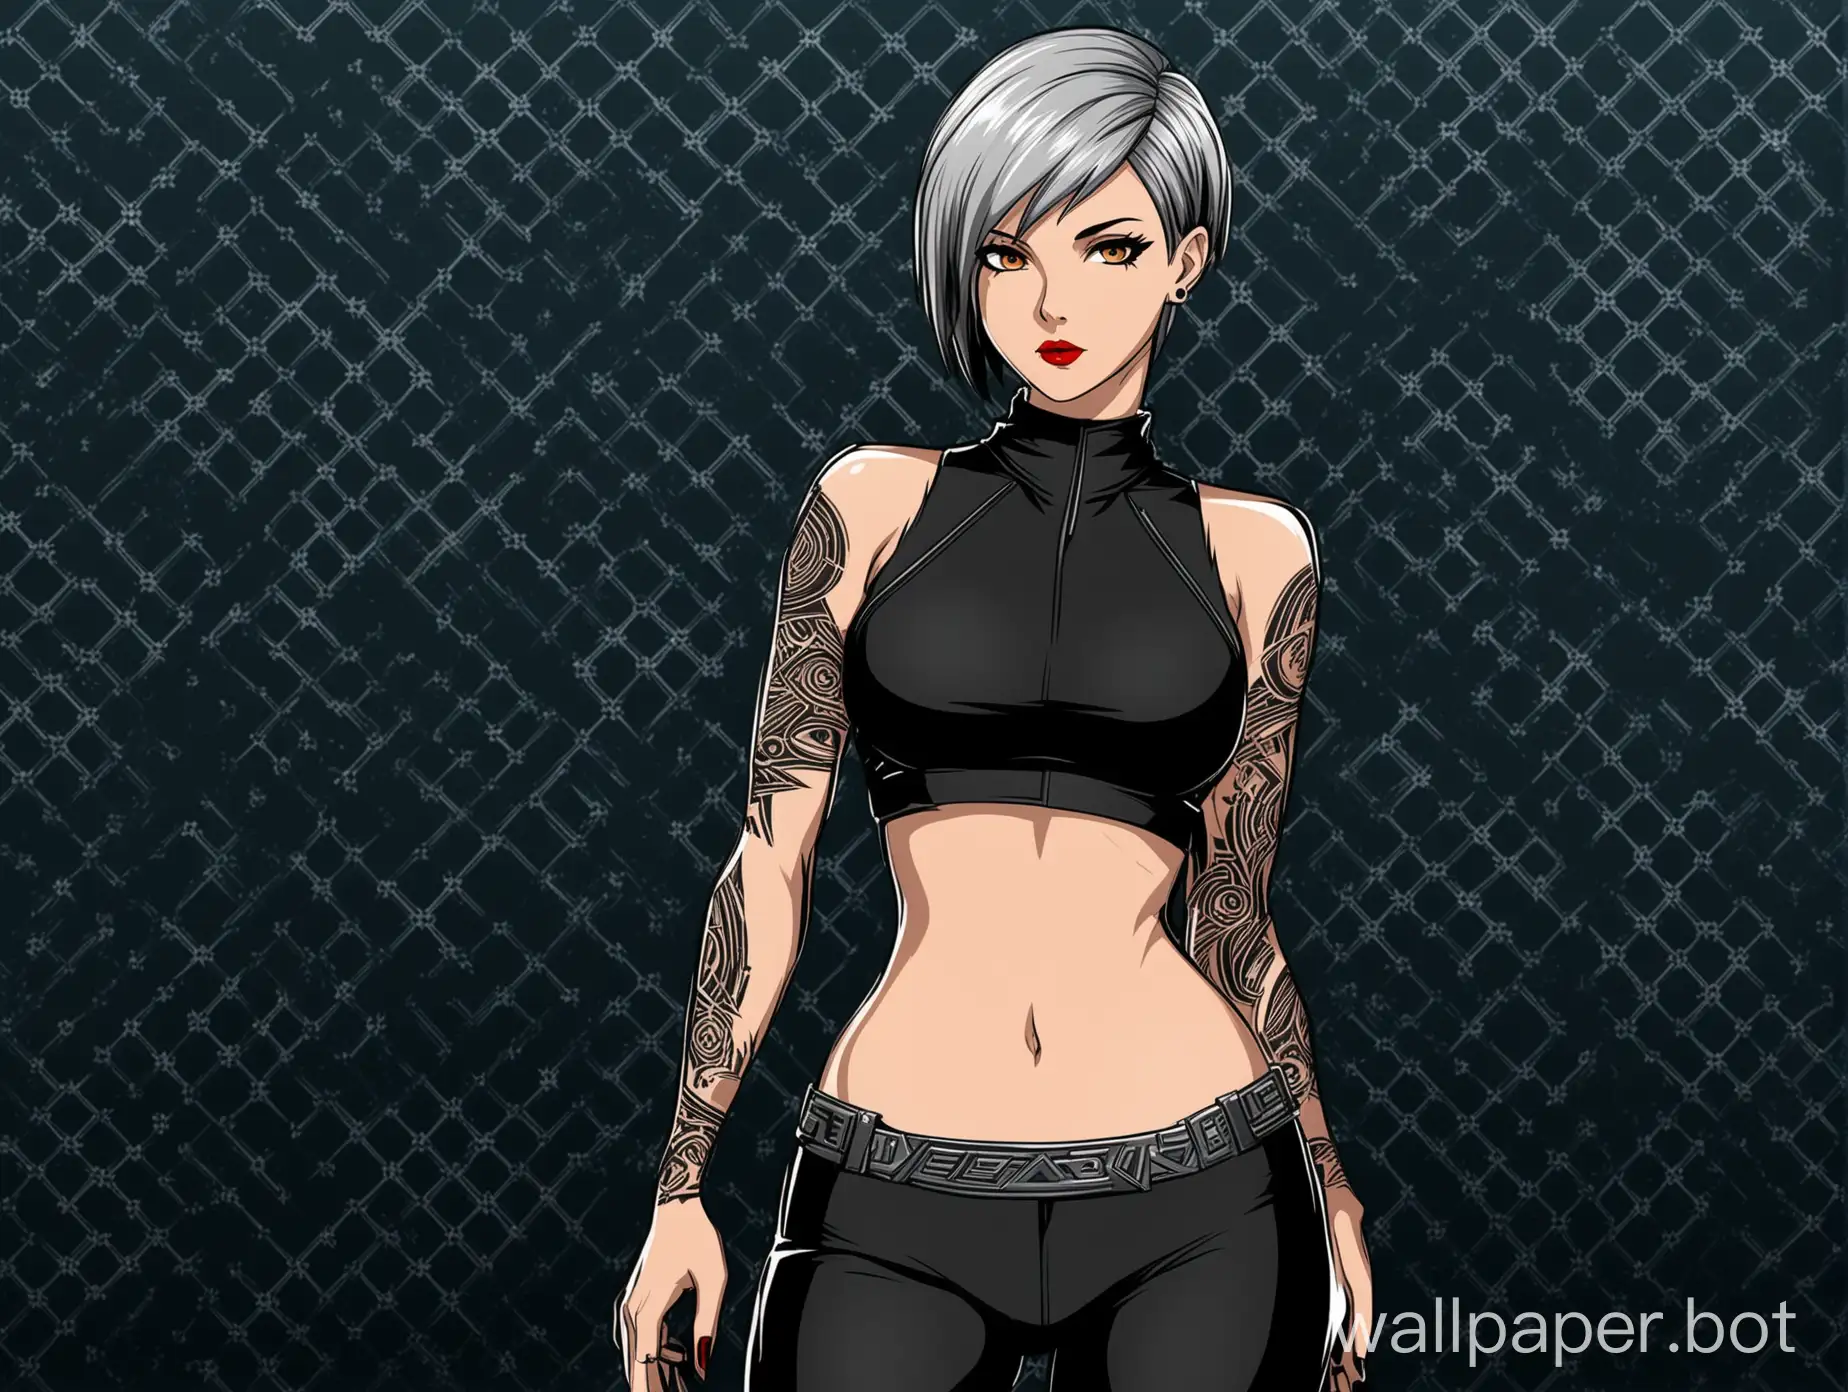 Design a captivating wallpaper featuring a sultry anime female character with a short silver hairstyle similar to Ruby Rose's character in 'XXX Return of Xander Cage'. The character should exude confidence and charisma, with a seductive yet edgy look that reflects her personality. Her silver short hairstyle should be sleek and modern, adding to her bold and dynamic appearance. Dress her in a crop top that accentuates her curvy physique, paired with stylish bottoms that reveal a bit more skin. Enhance her sexiness with subtle yet alluring poses and expressions. Incorporate elements of the Arch Linux logo, such as its color scheme or logo shape, into the background or accessories to give the wallpaper a tech-inspired edge. The background should be monochromatic, clean, and mineralistic, with subtle textures or patterns to add depth and interest while maintaining a minimalist aesthetic.